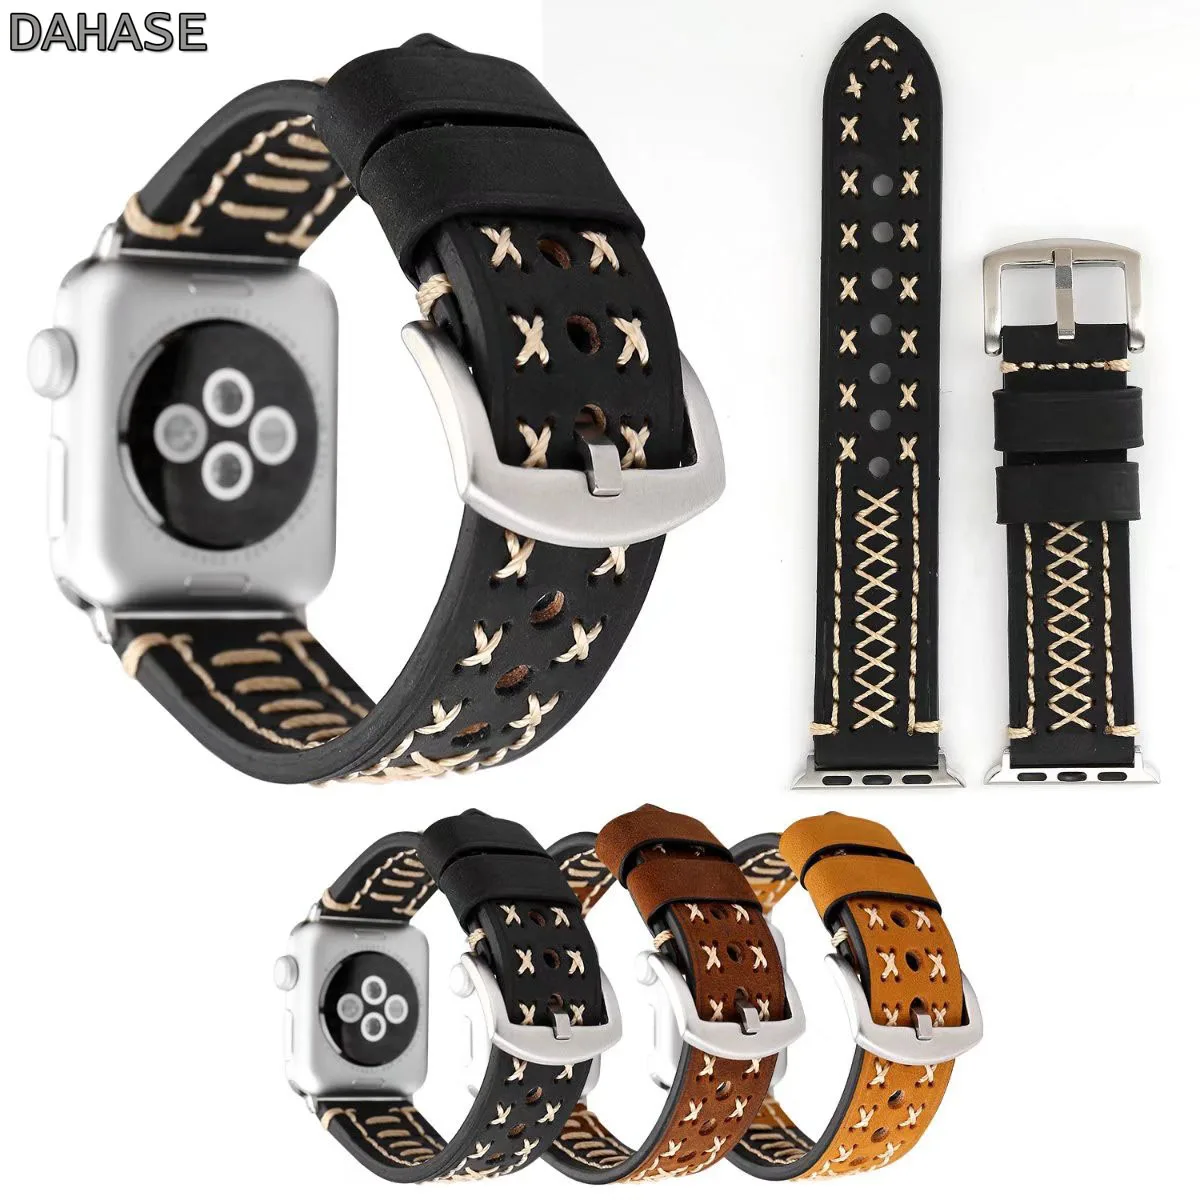 

DAHASE Retro Cross Genuine Leather Watch Band for Apple Watch Series 8 7 6 5 4 3 Strap Metal Buckle Band for iWatch 42mm 38mm